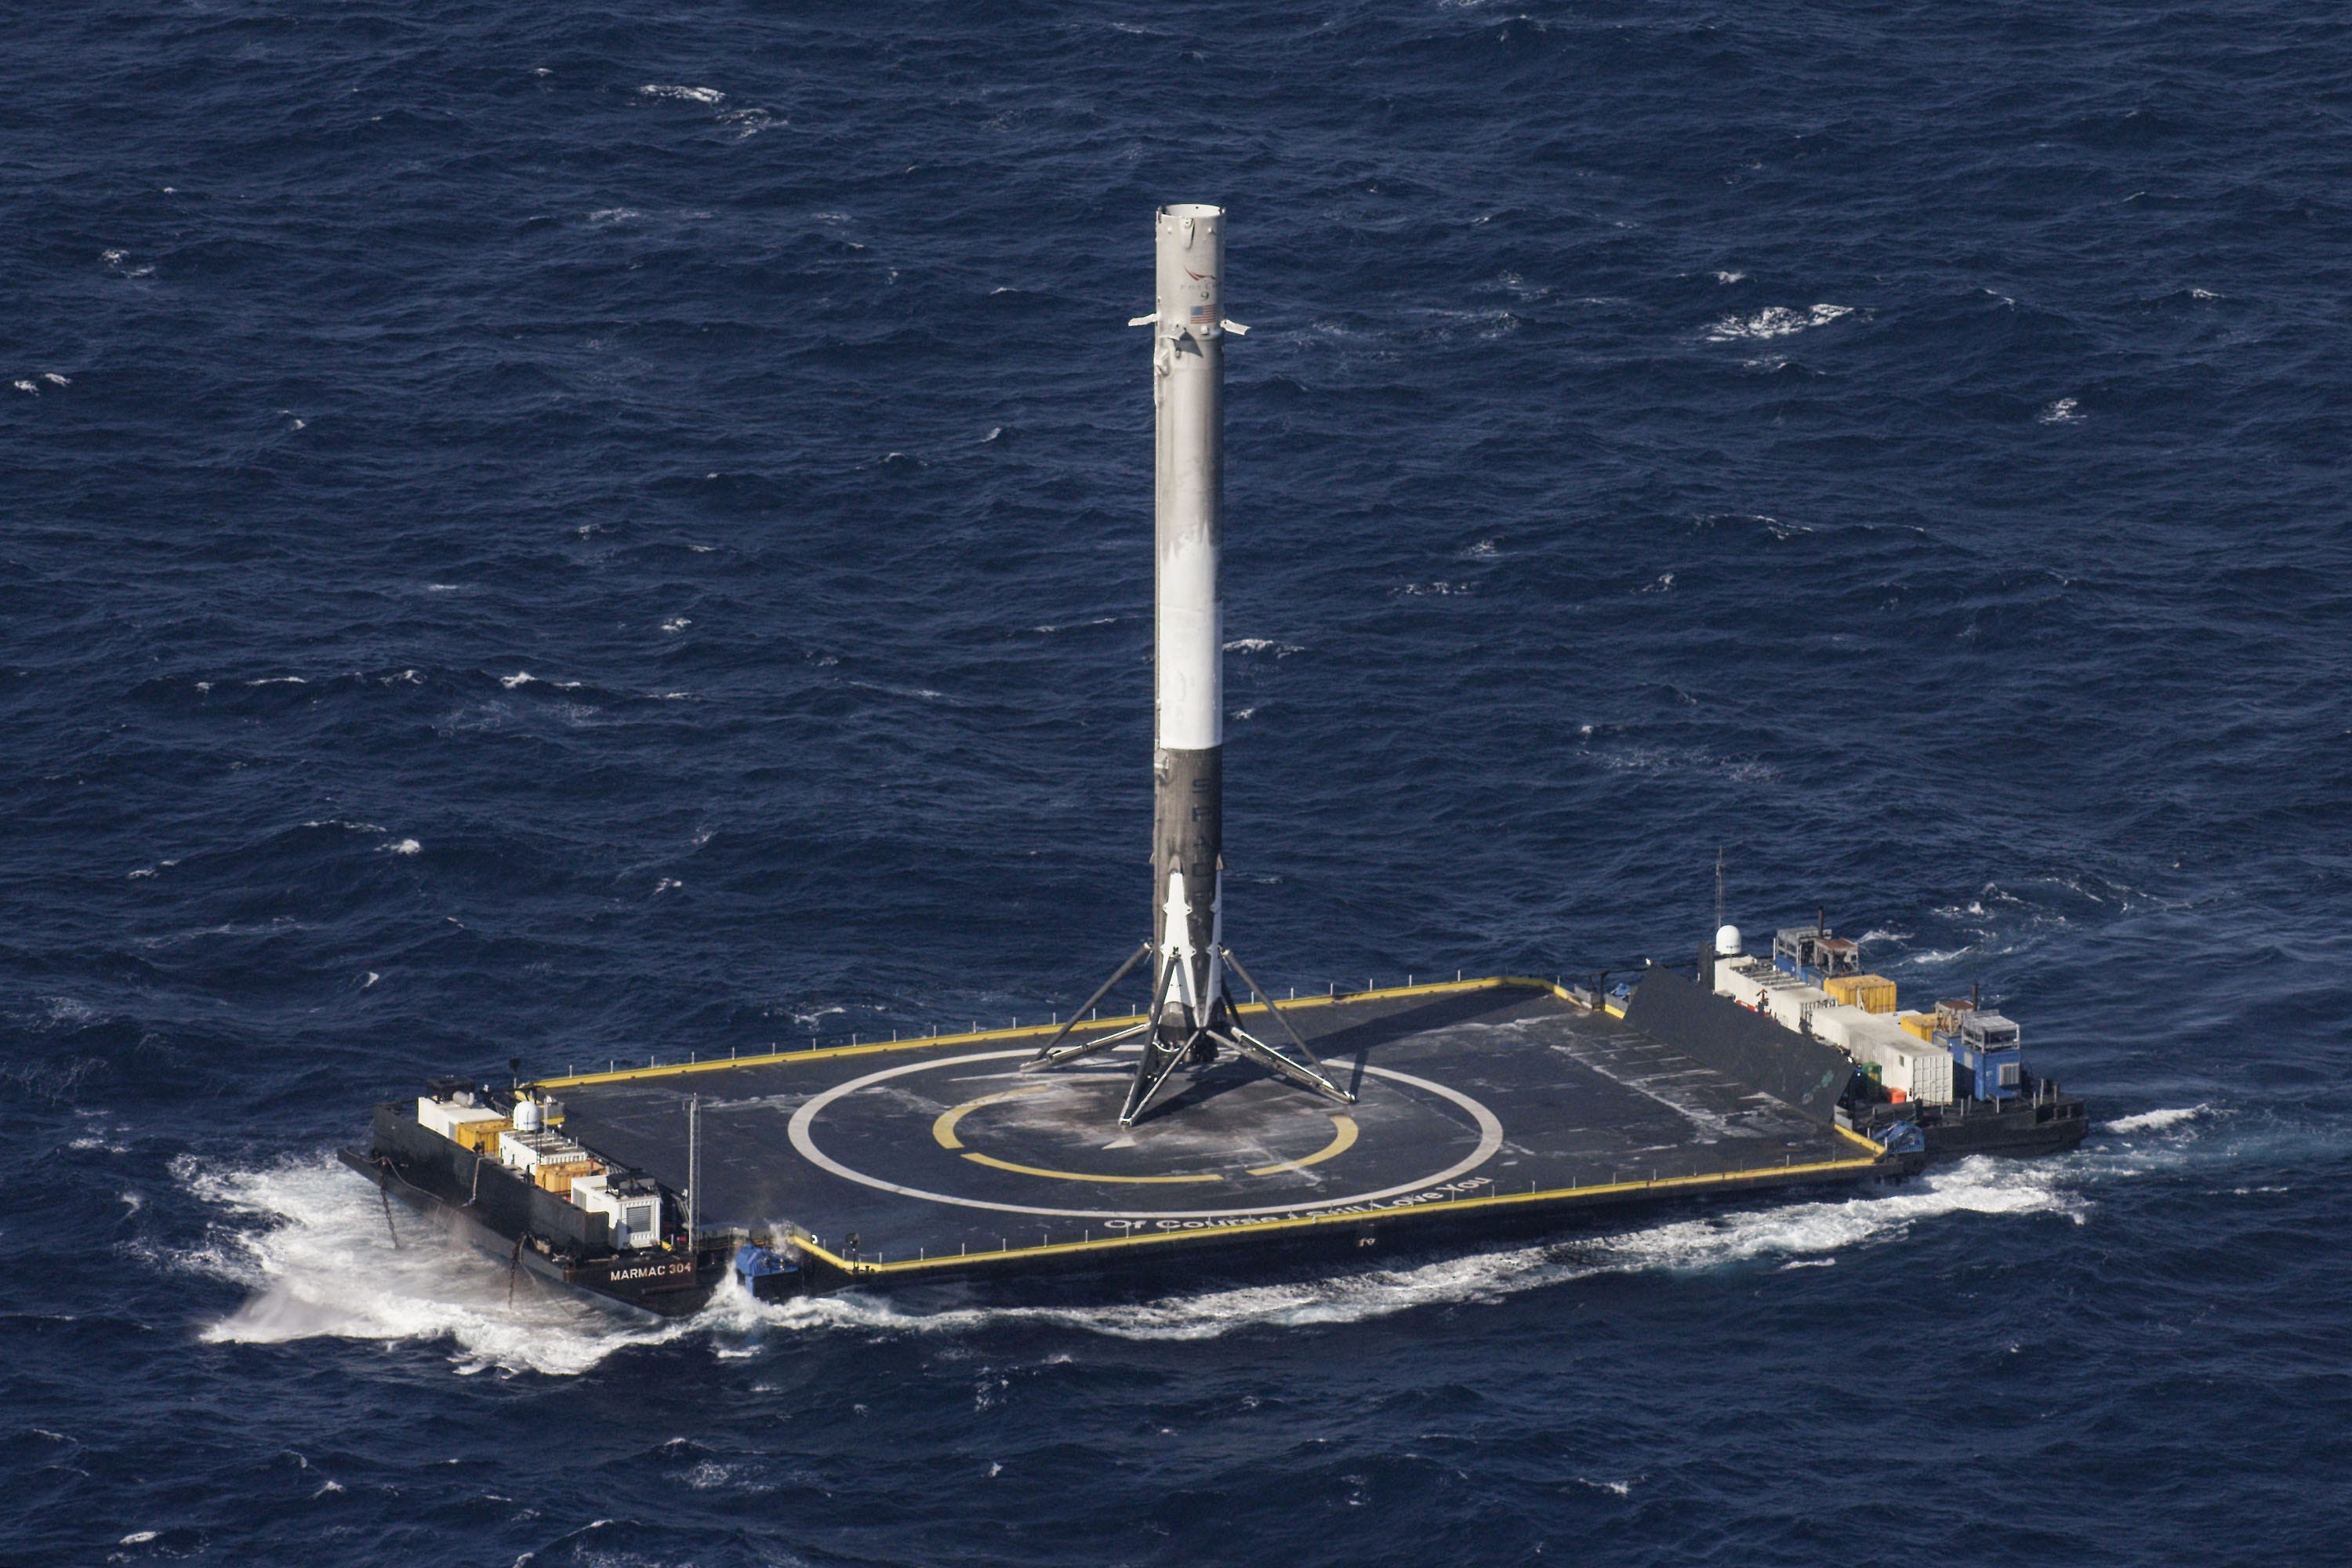 a spacex rocket booster was ruined after toppling over in rough waters